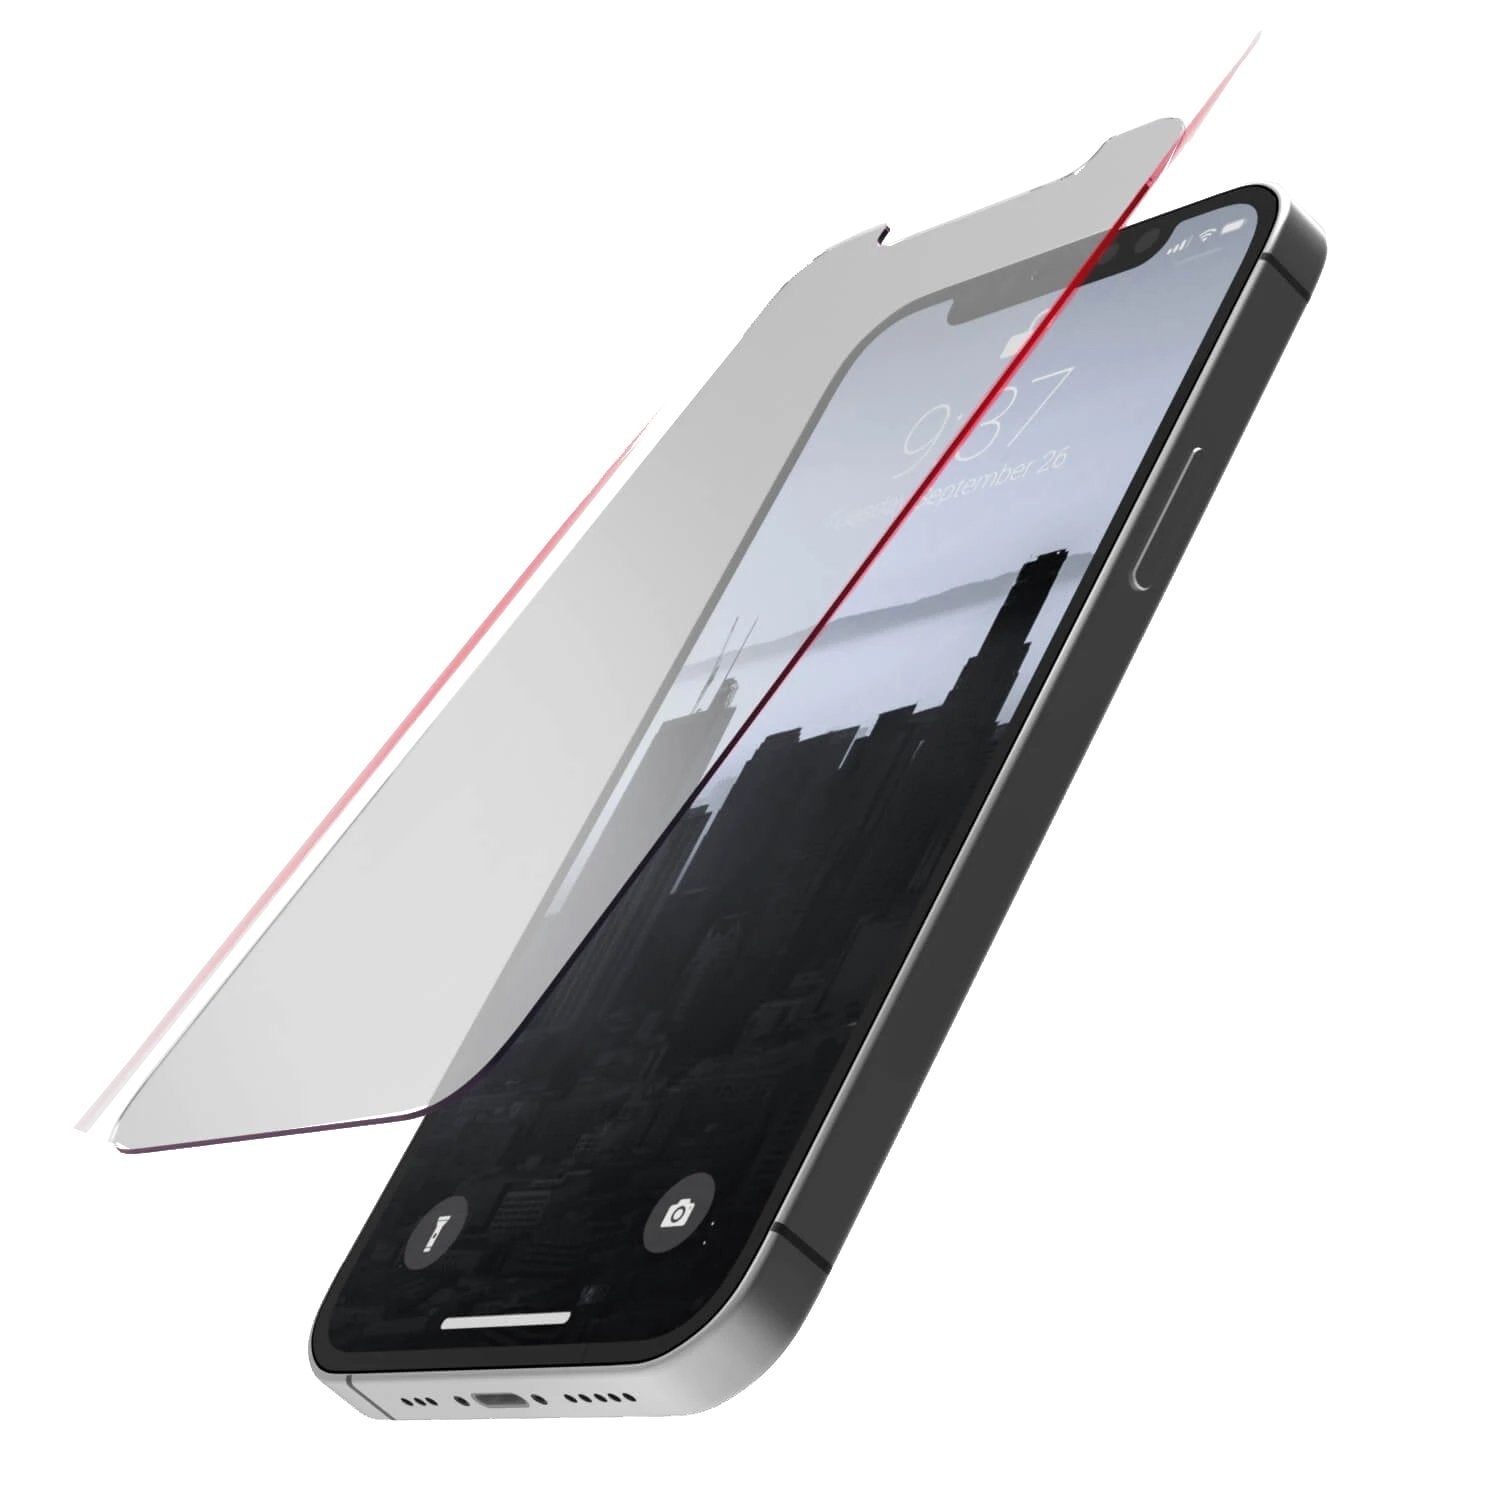 The Raptic iPhone 14 Full Cover Glass screen protector is shown on a white background.